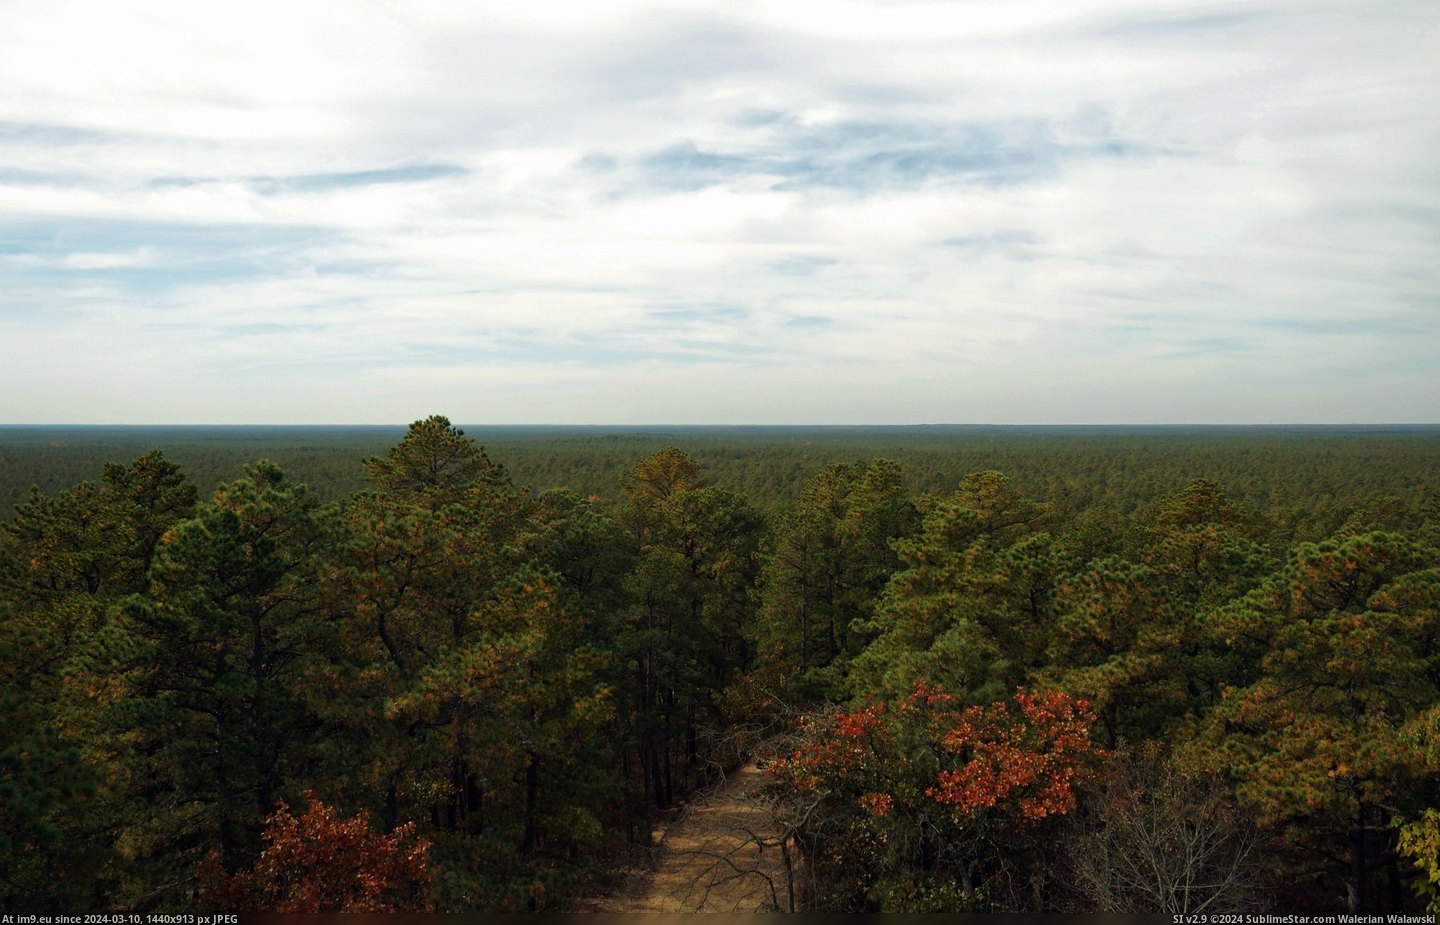 #Fire #Tower #Apple #Pine #Endless #Barrens #Hill #Pie #Jersey [Earthporn] [OC] Endless pine barrens, from the Apple Pie Hill fire tower in New Jersey [2819 x 1800] Pic. (Изображение из альбом My r/EARTHPORN favs))